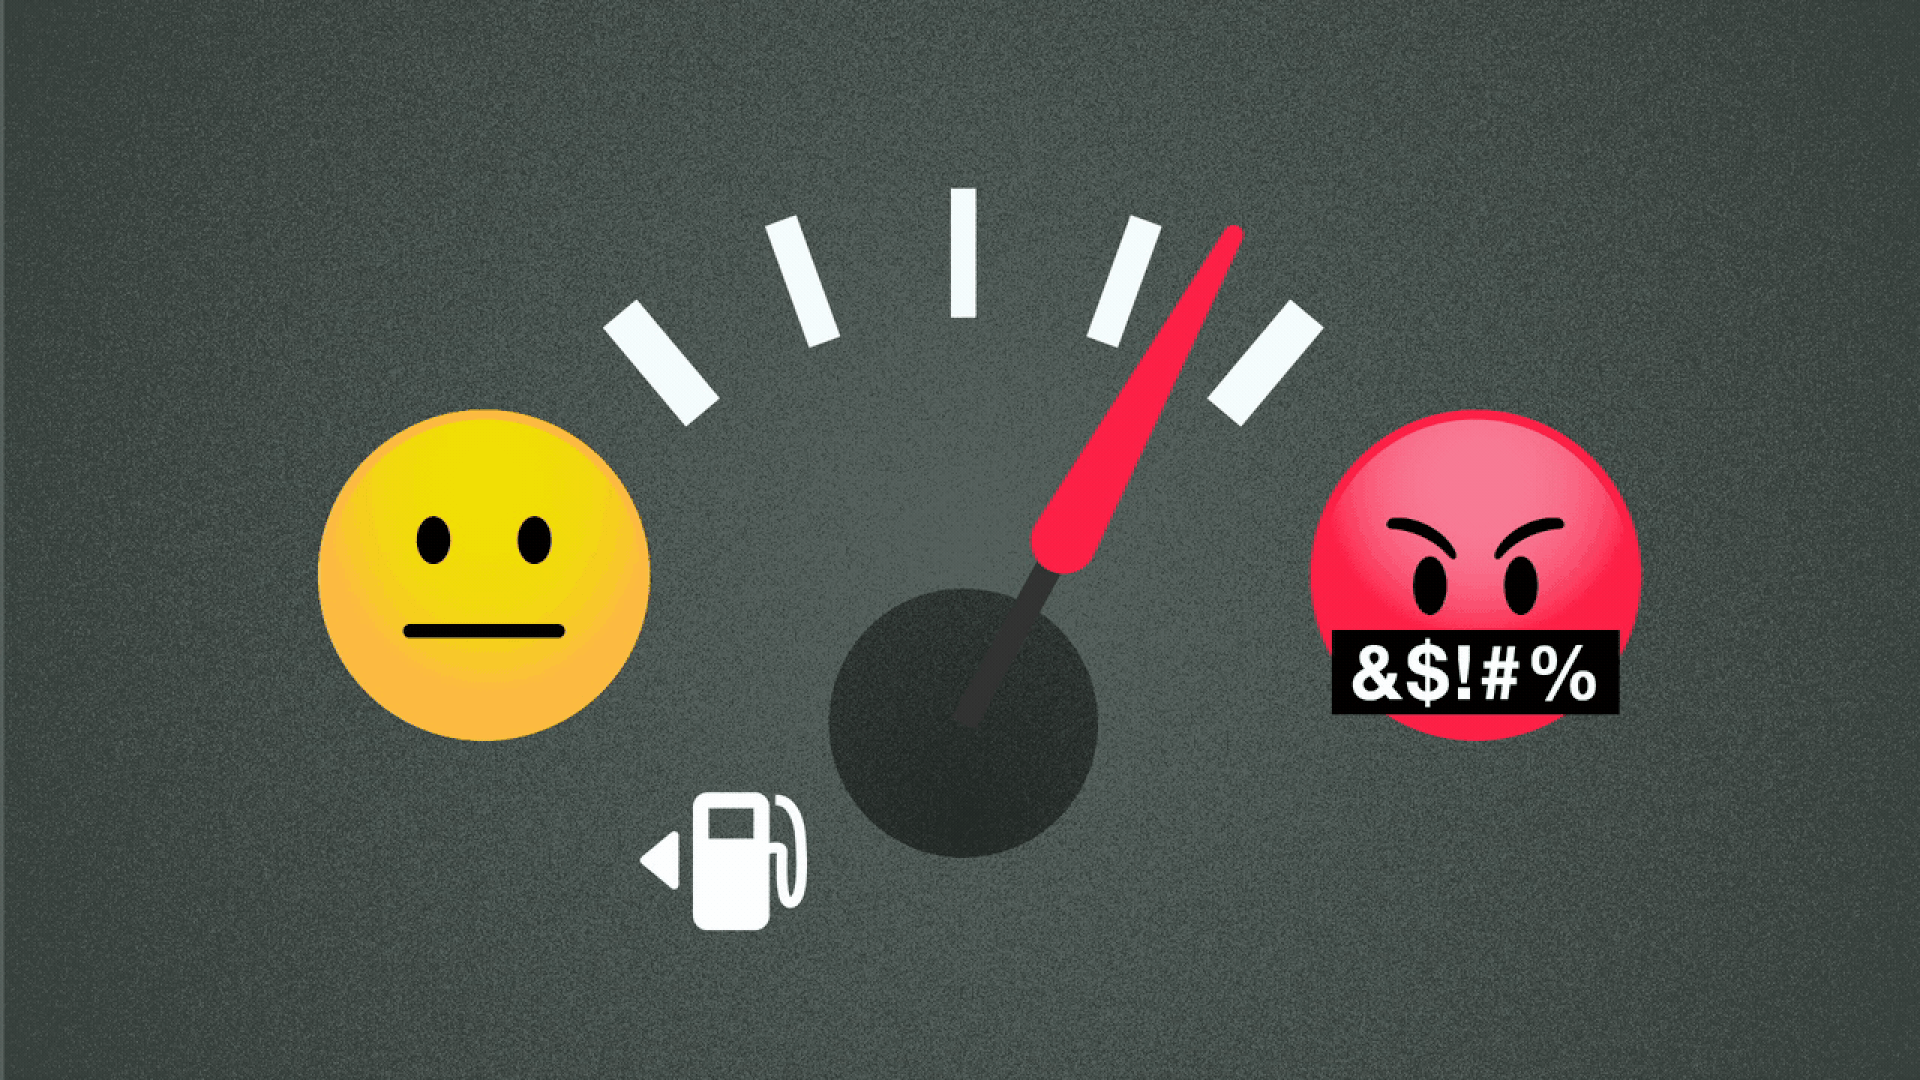 Illustration of a car gas gauge, with a neutral emoji on the left and a swearing emoji on the right, and the needle reaching the swearing side.